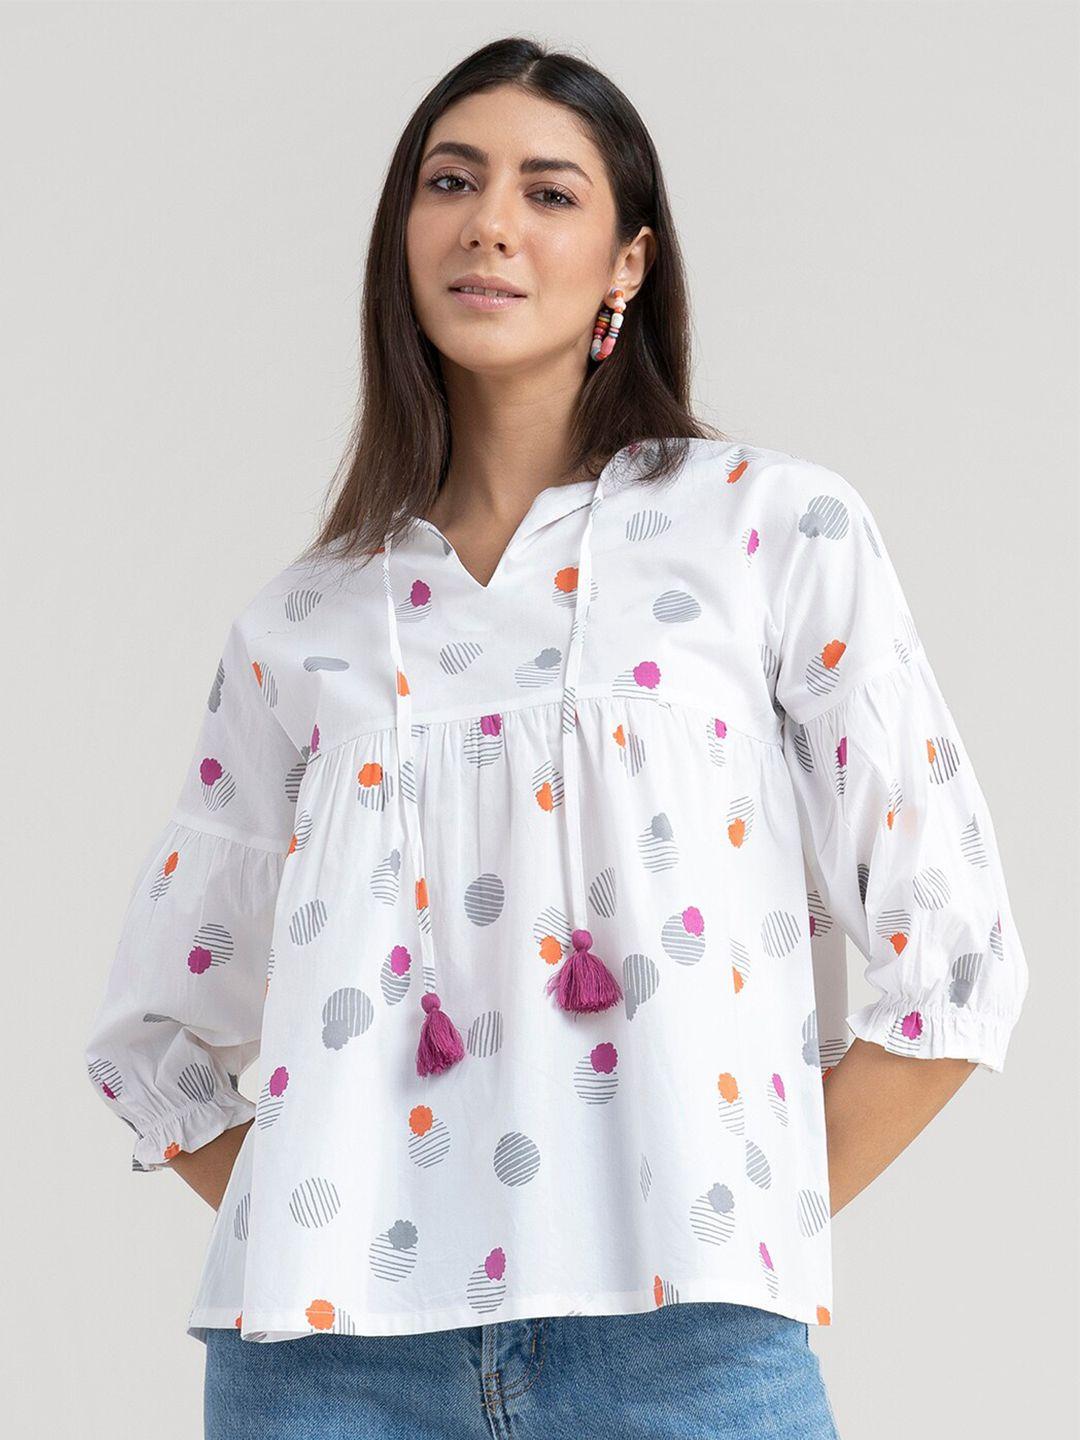 marigold by fablestreet white floral print mandarin collar top